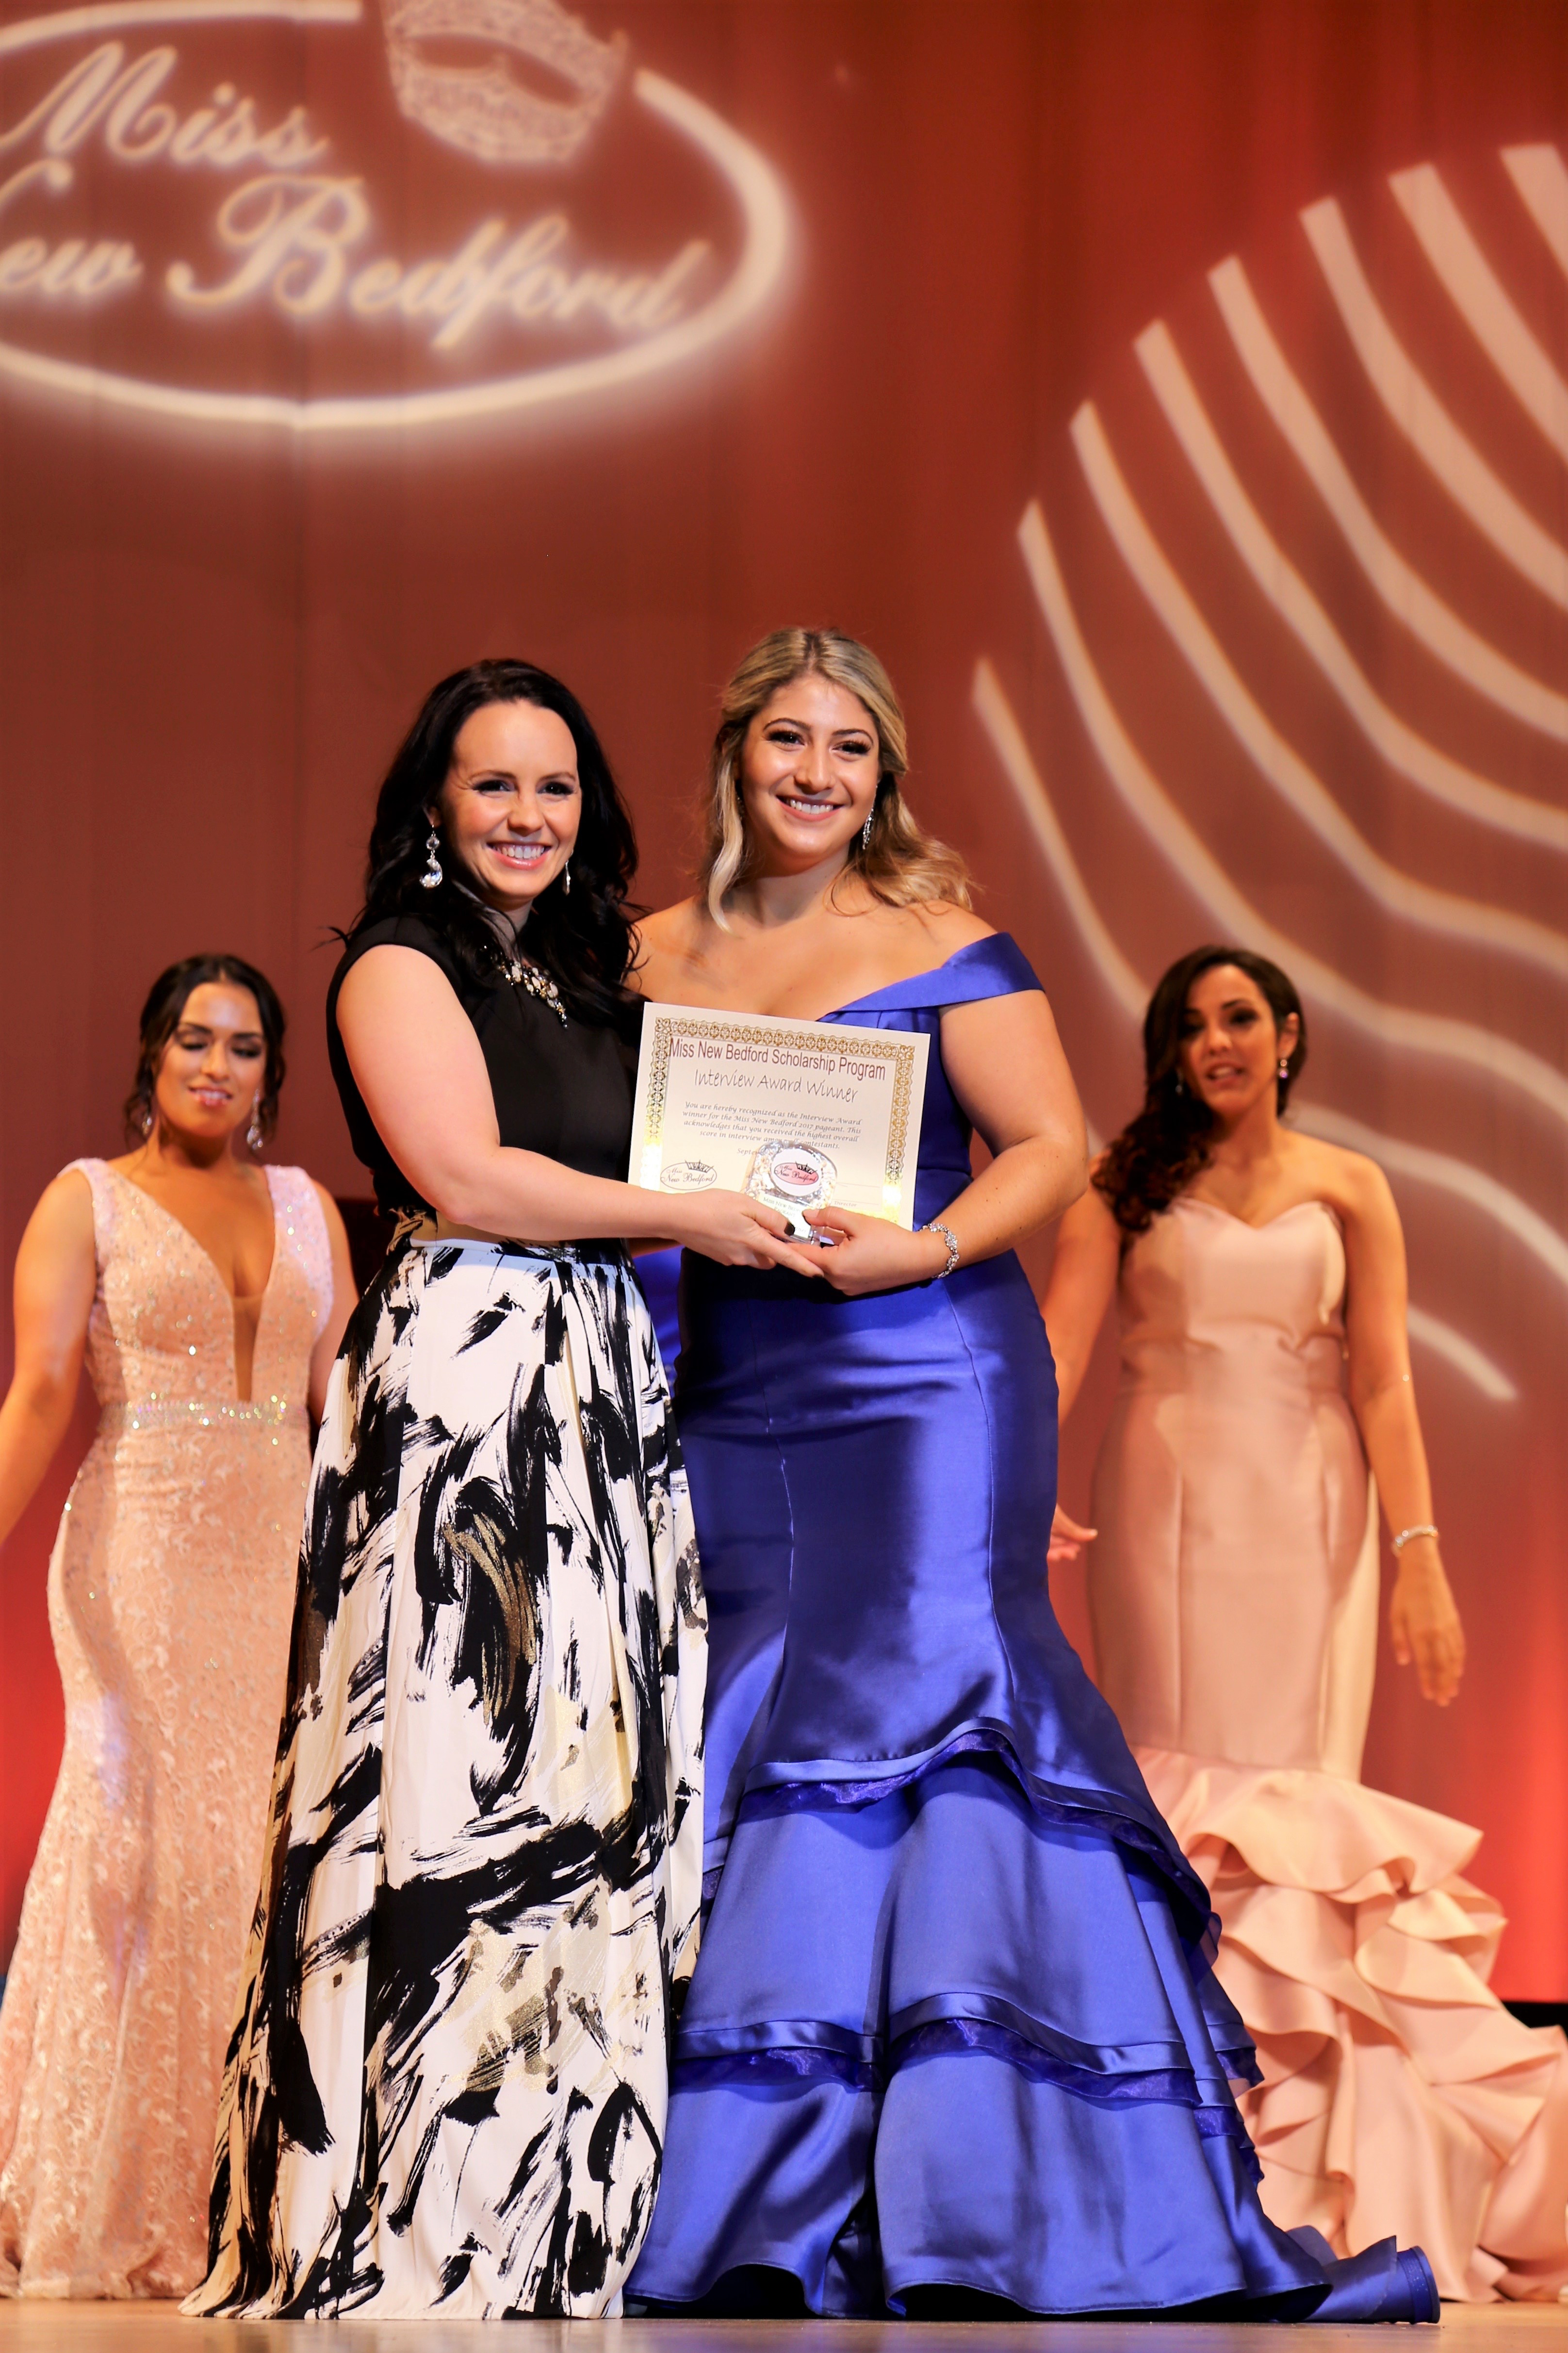 Kenzie Moniz receives the Interview Award standing on stage in a floor-length shiny purple dress.